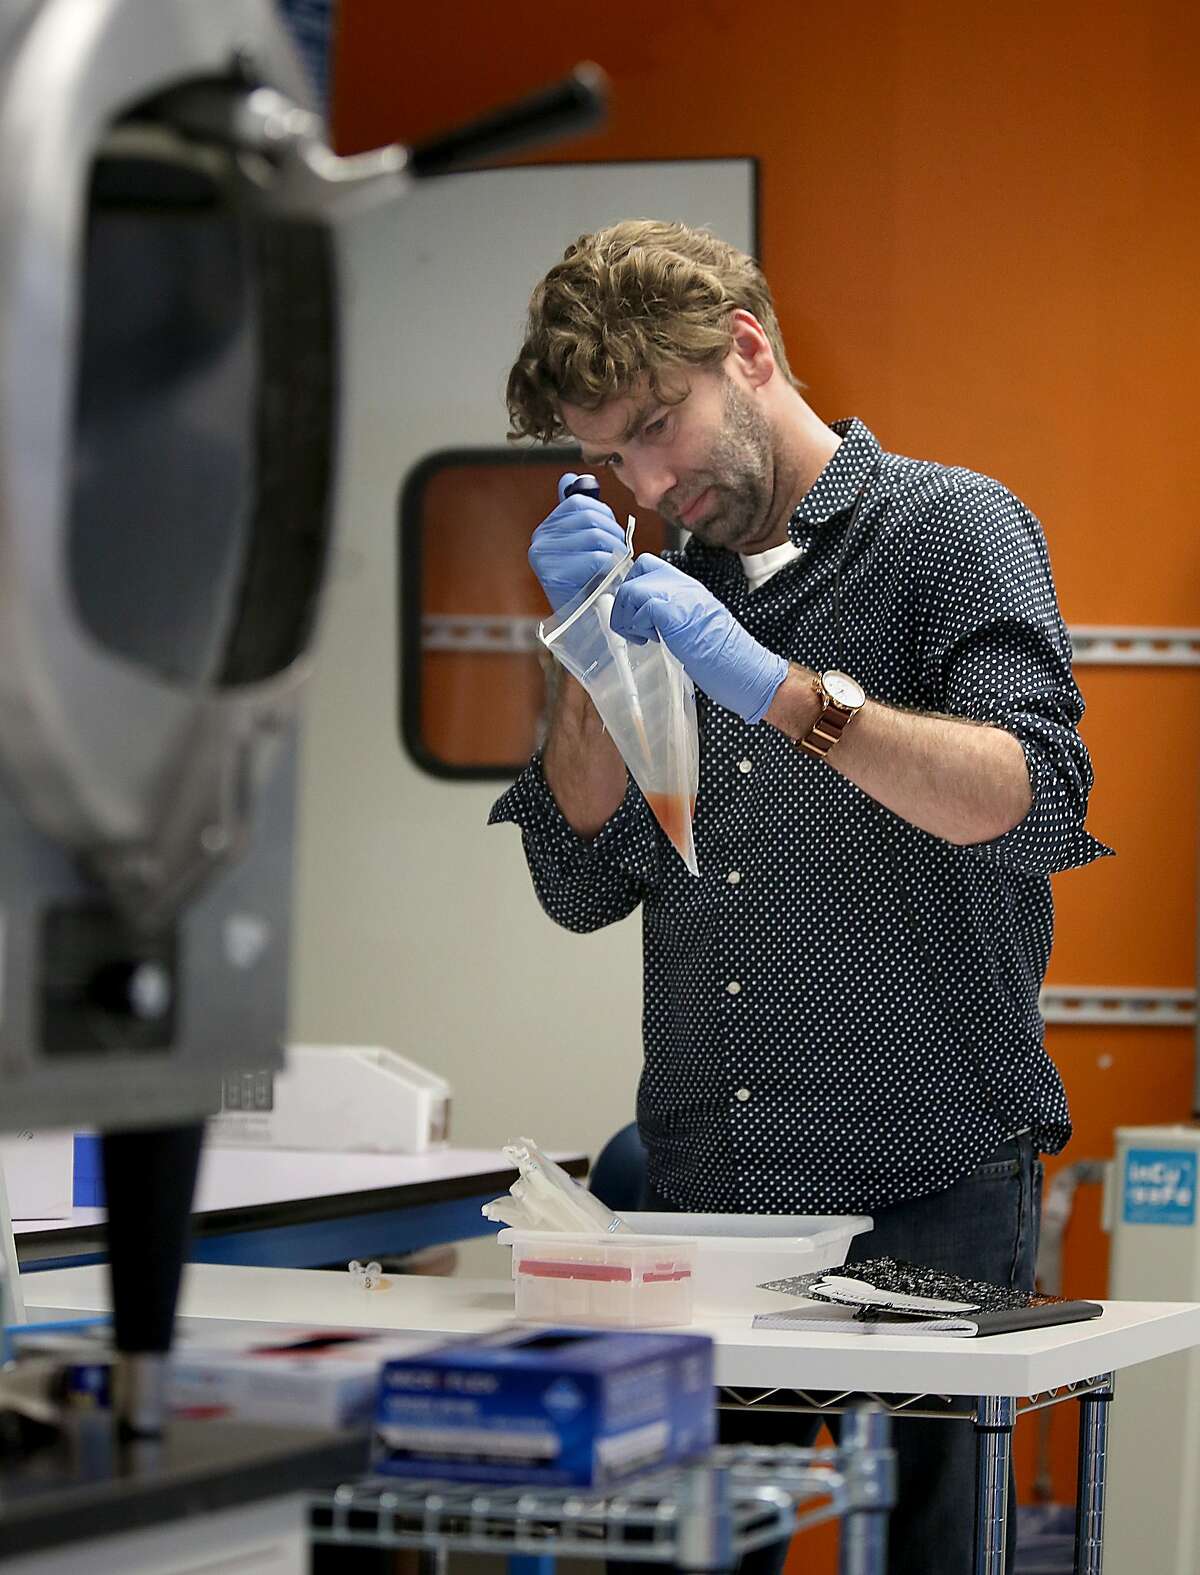 Senior scientist Chris Haney takes a sample of water rinsed from chicken skin to do an analysis at Clear Labs which conducts DNA sequencing and analysis of food samples on Thursday, July 27, 2017, in Menlo Park, Calif.